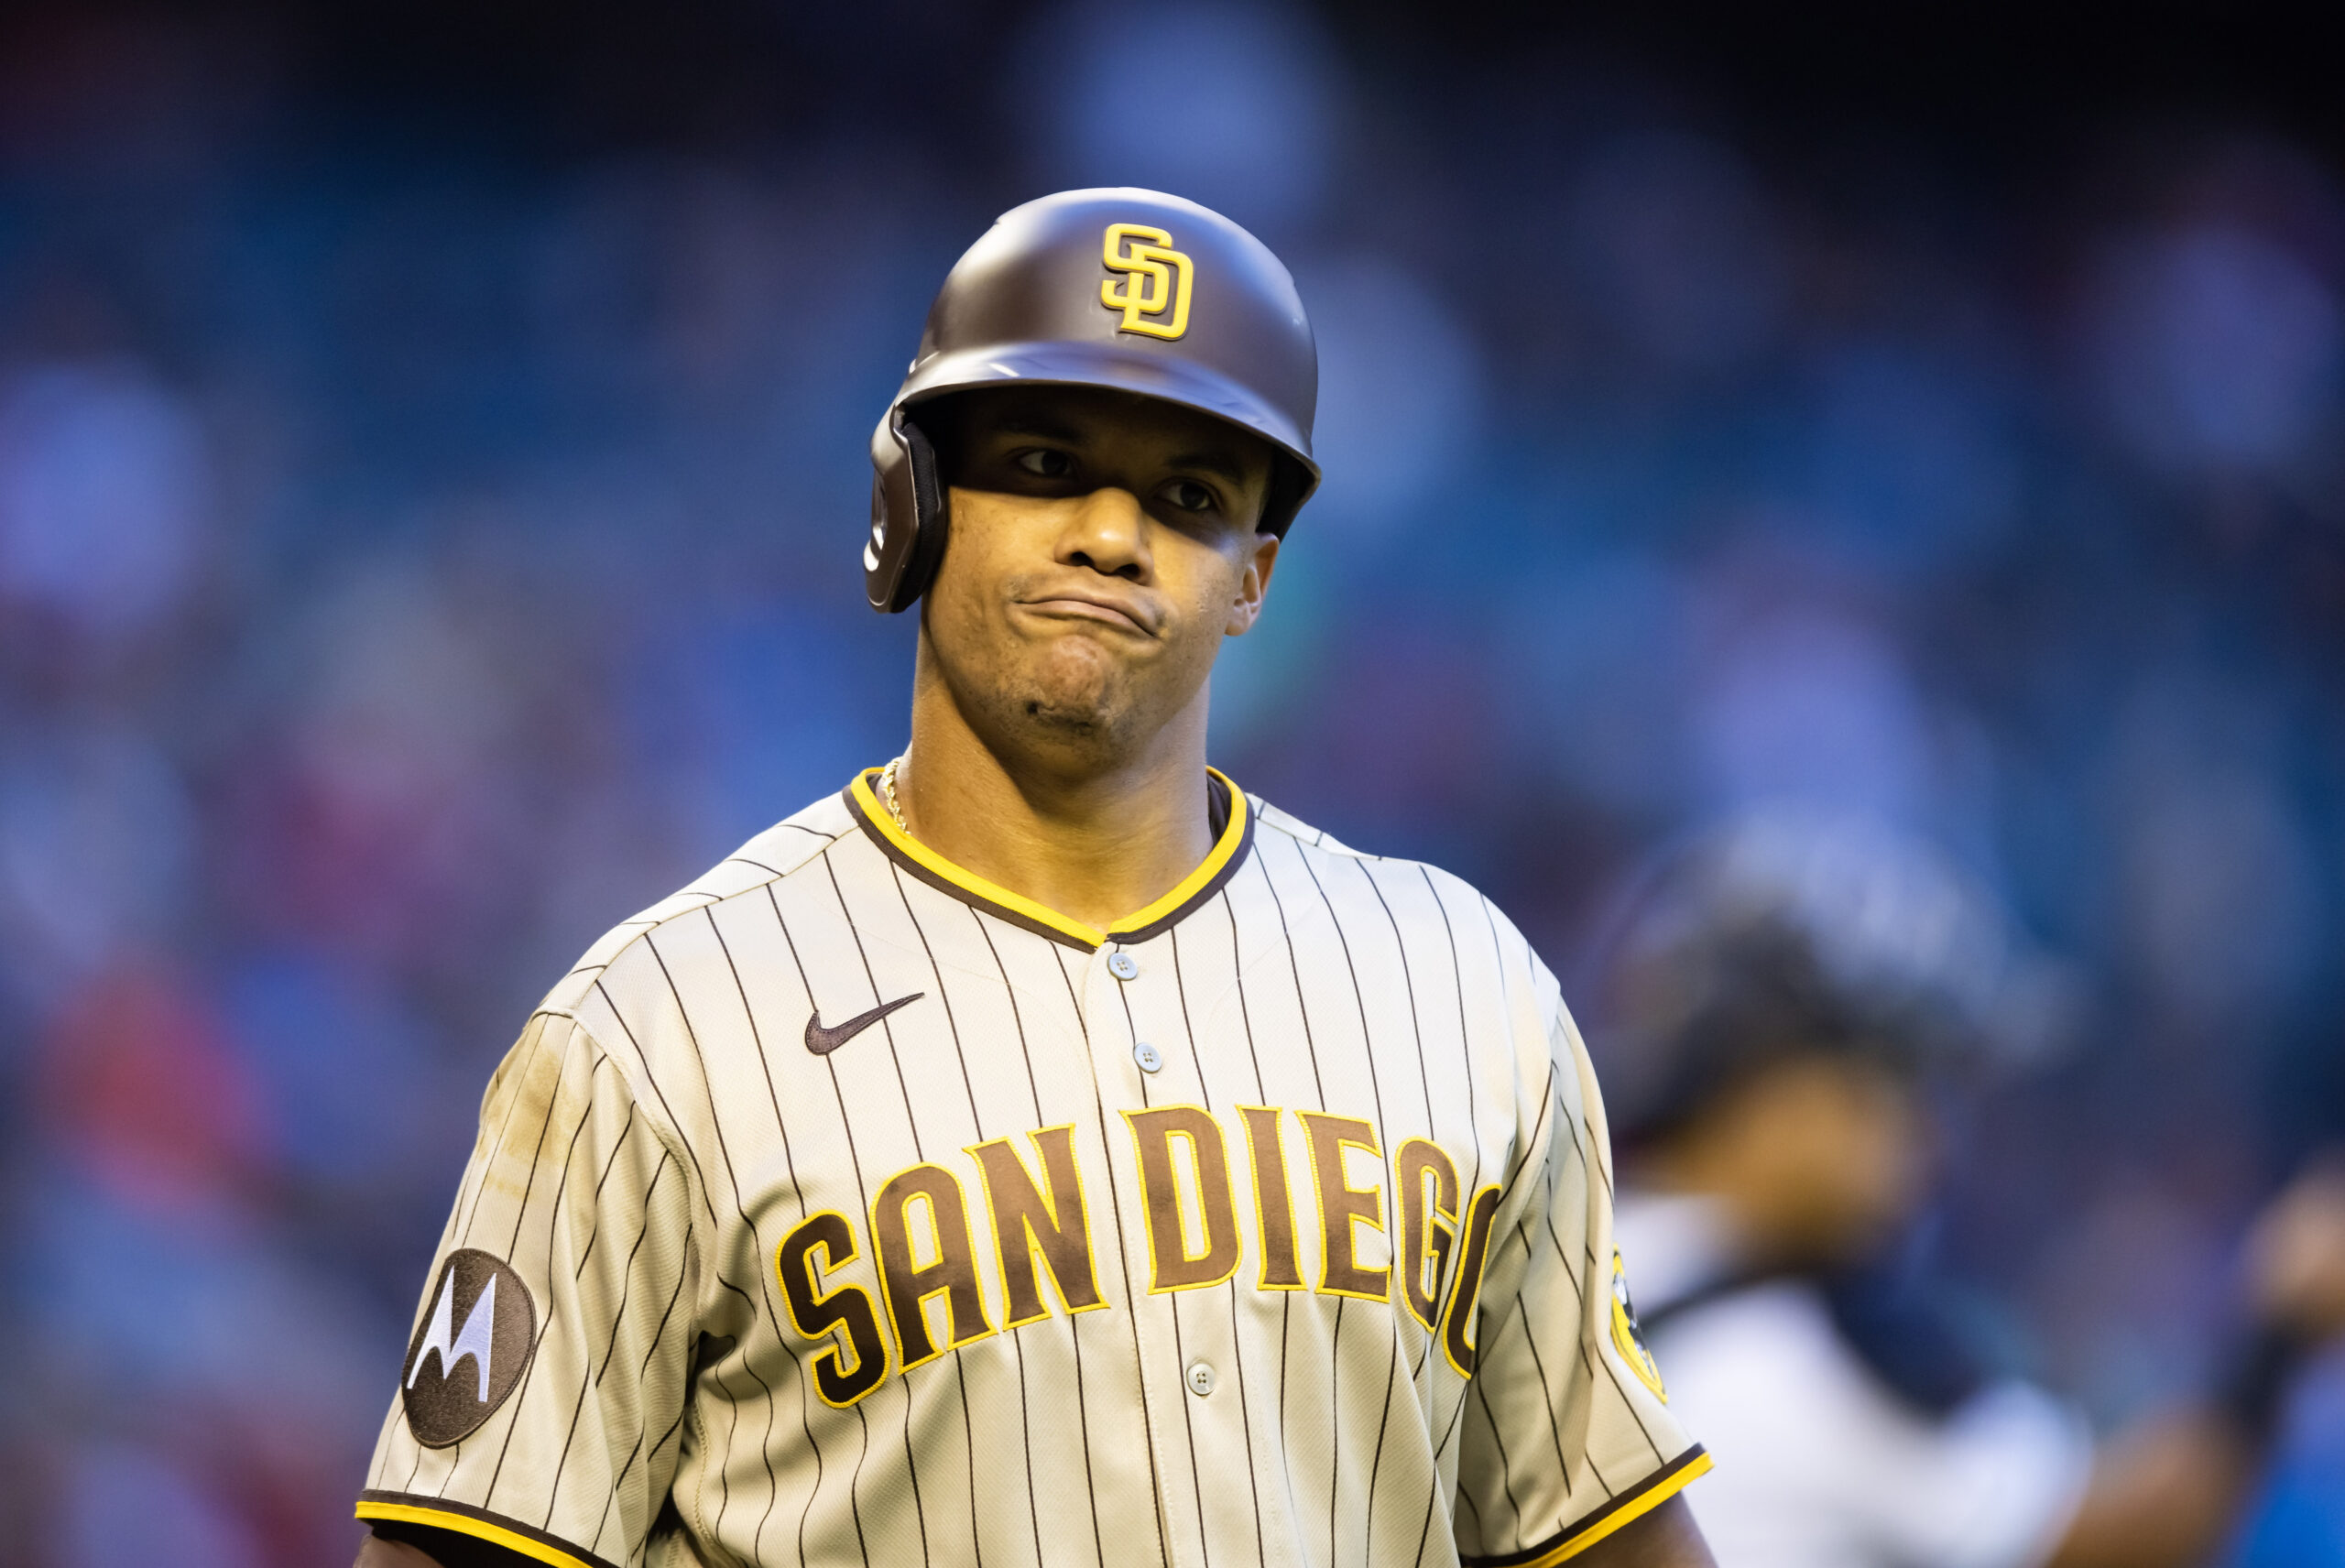 The Padres' disastrous season reveals shaky foundation and